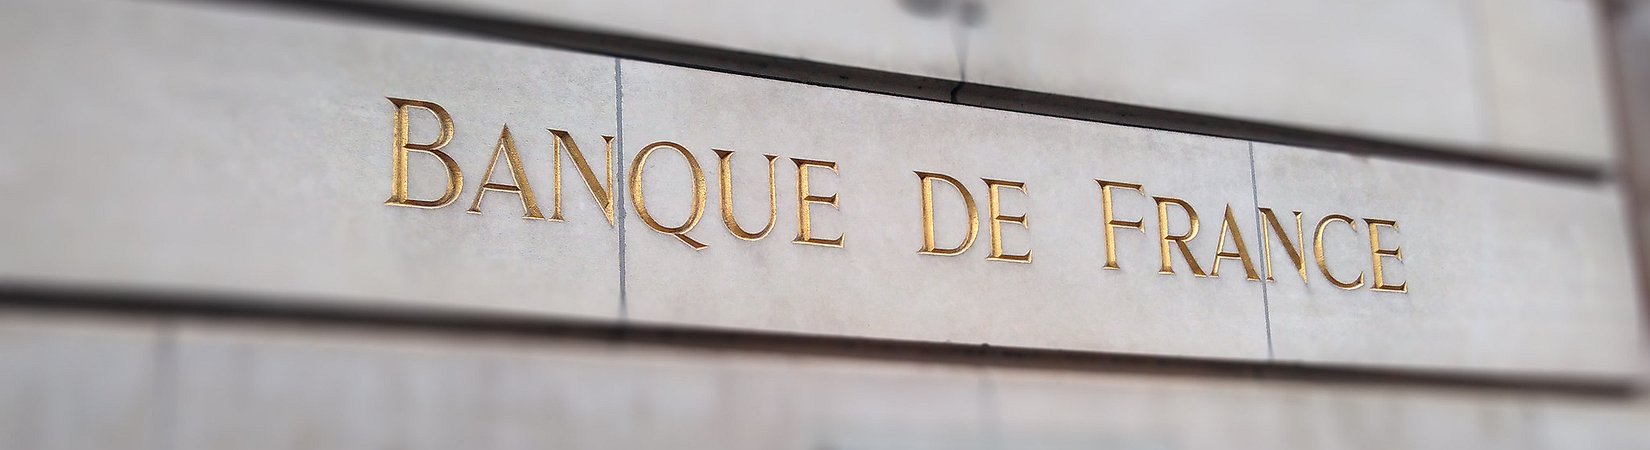 Bank of France Successfully Completes Testing of Digital Euro | News ...